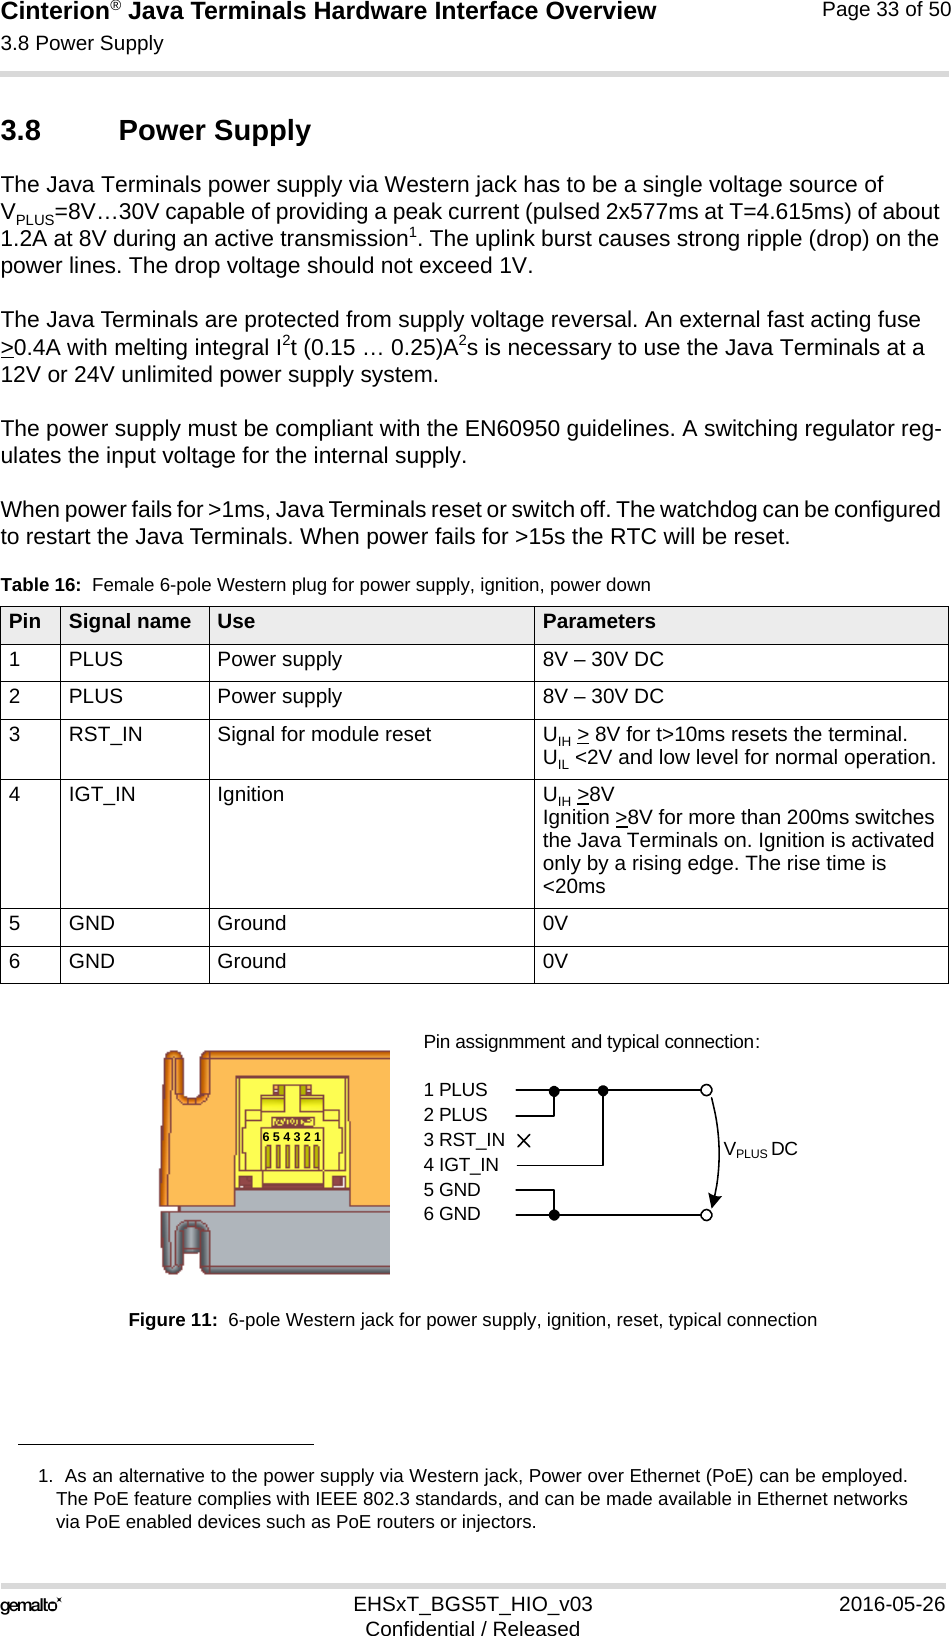 Cinterion® Java Terminals Hardware Interface Overview3.8 Power Supply39EHSxT_BGS5T_HIO_v03 2016-05-26Confidential / ReleasedPage 33 of 503.8 Power SupplyThe Java Terminals power supply via Western jack has to be a single voltage source of VPLUS=8V…30V capable of providing a peak current (pulsed 2x577ms at T=4.615ms) of about 1.2A at 8V during an active transmission1. The uplink burst causes strong ripple (drop) on the power lines. The drop voltage should not exceed 1V. The Java Terminals are protected from supply voltage reversal. An external fast acting fuse &gt;0.4A with melting integral I2t (0.15 … 0.25)A2s is necessary to use the Java Terminals at a 12V or 24V unlimited power supply system.The power supply must be compliant with the EN60950 guidelines. A switching regulator reg-ulates the input voltage for the internal supply.When power fails for &gt;1ms, Java Terminals reset or switch off. The watchdog can be configured to restart the Java Terminals. When power fails for &gt;15s the RTC will be reset.Figure 11:  6-pole Western jack for power supply, ignition, reset, typical connection1.  As an alternative to the power supply via Western jack, Power over Ethernet (PoE) can be employed.The PoE feature complies with IEEE 802.3 standards, and can be made available in Ethernet networksvia PoE enabled devices such as PoE routers or injectors.Table 16:  Female 6-pole Western plug for power supply, ignition, power downPin Signal name Use Parameters1 PLUS Power supply 8V – 30V DC2 PLUS Power supply 8V – 30V DC3 RST_IN Signal for module reset UIH &gt; 8V for t&gt;10ms resets the terminal.UIL &lt;2V and low level for normal operation.4 IGT_IN Ignition UIH &gt;8VIgnition &gt;8V for more than 200ms switches the Java Terminals on. Ignition is activated only by a rising edge. The rise time is &lt;20ms5 GND Ground 0V6 GND Ground 0VPin assignmment and typical connection:1 PLUS2 PLUS3 RST_IN4 IGT_IN5 GND6 GNDVPLUS DC6 5 4 3 2 1